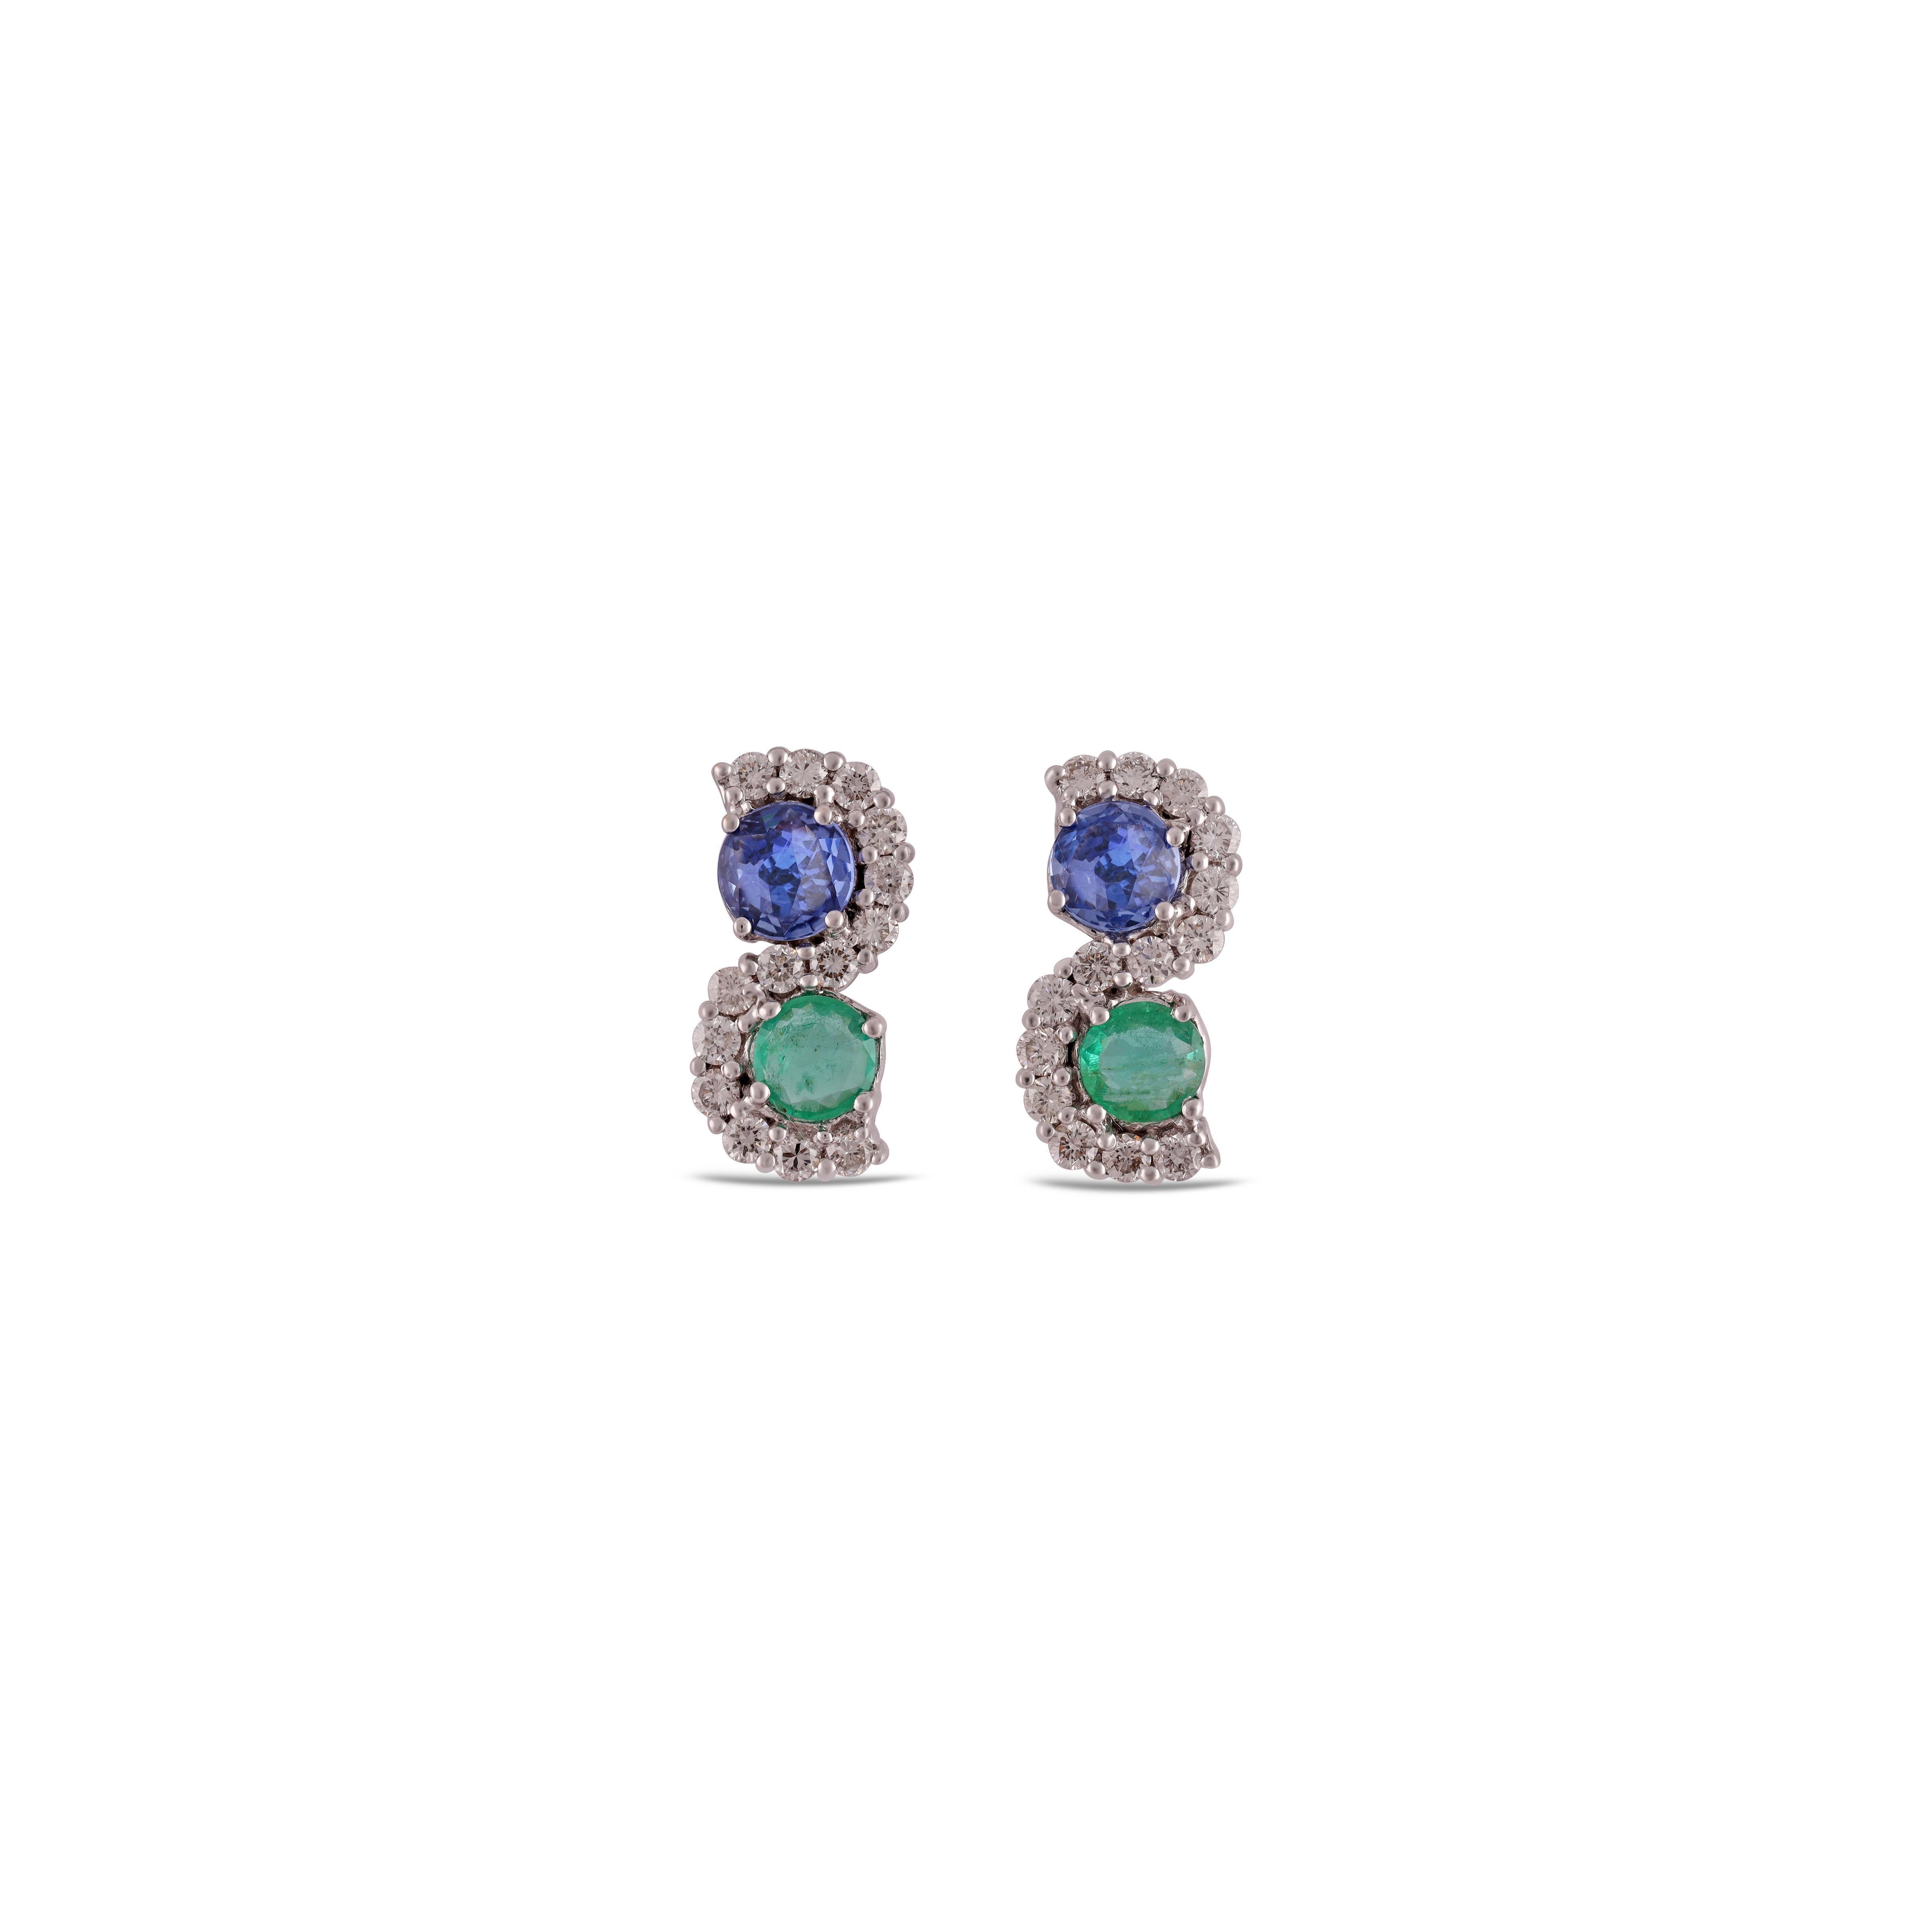 A stunning, fine and impressive pair of  1.23 carat blue sapphire, Emerald 0.67 Carat  & 0.56 Carat  Diamond with Solid 18k Gold. 

Studs create a subtle beauty while showcasing the colors of the natural precious gemstones and illuminating diamonds